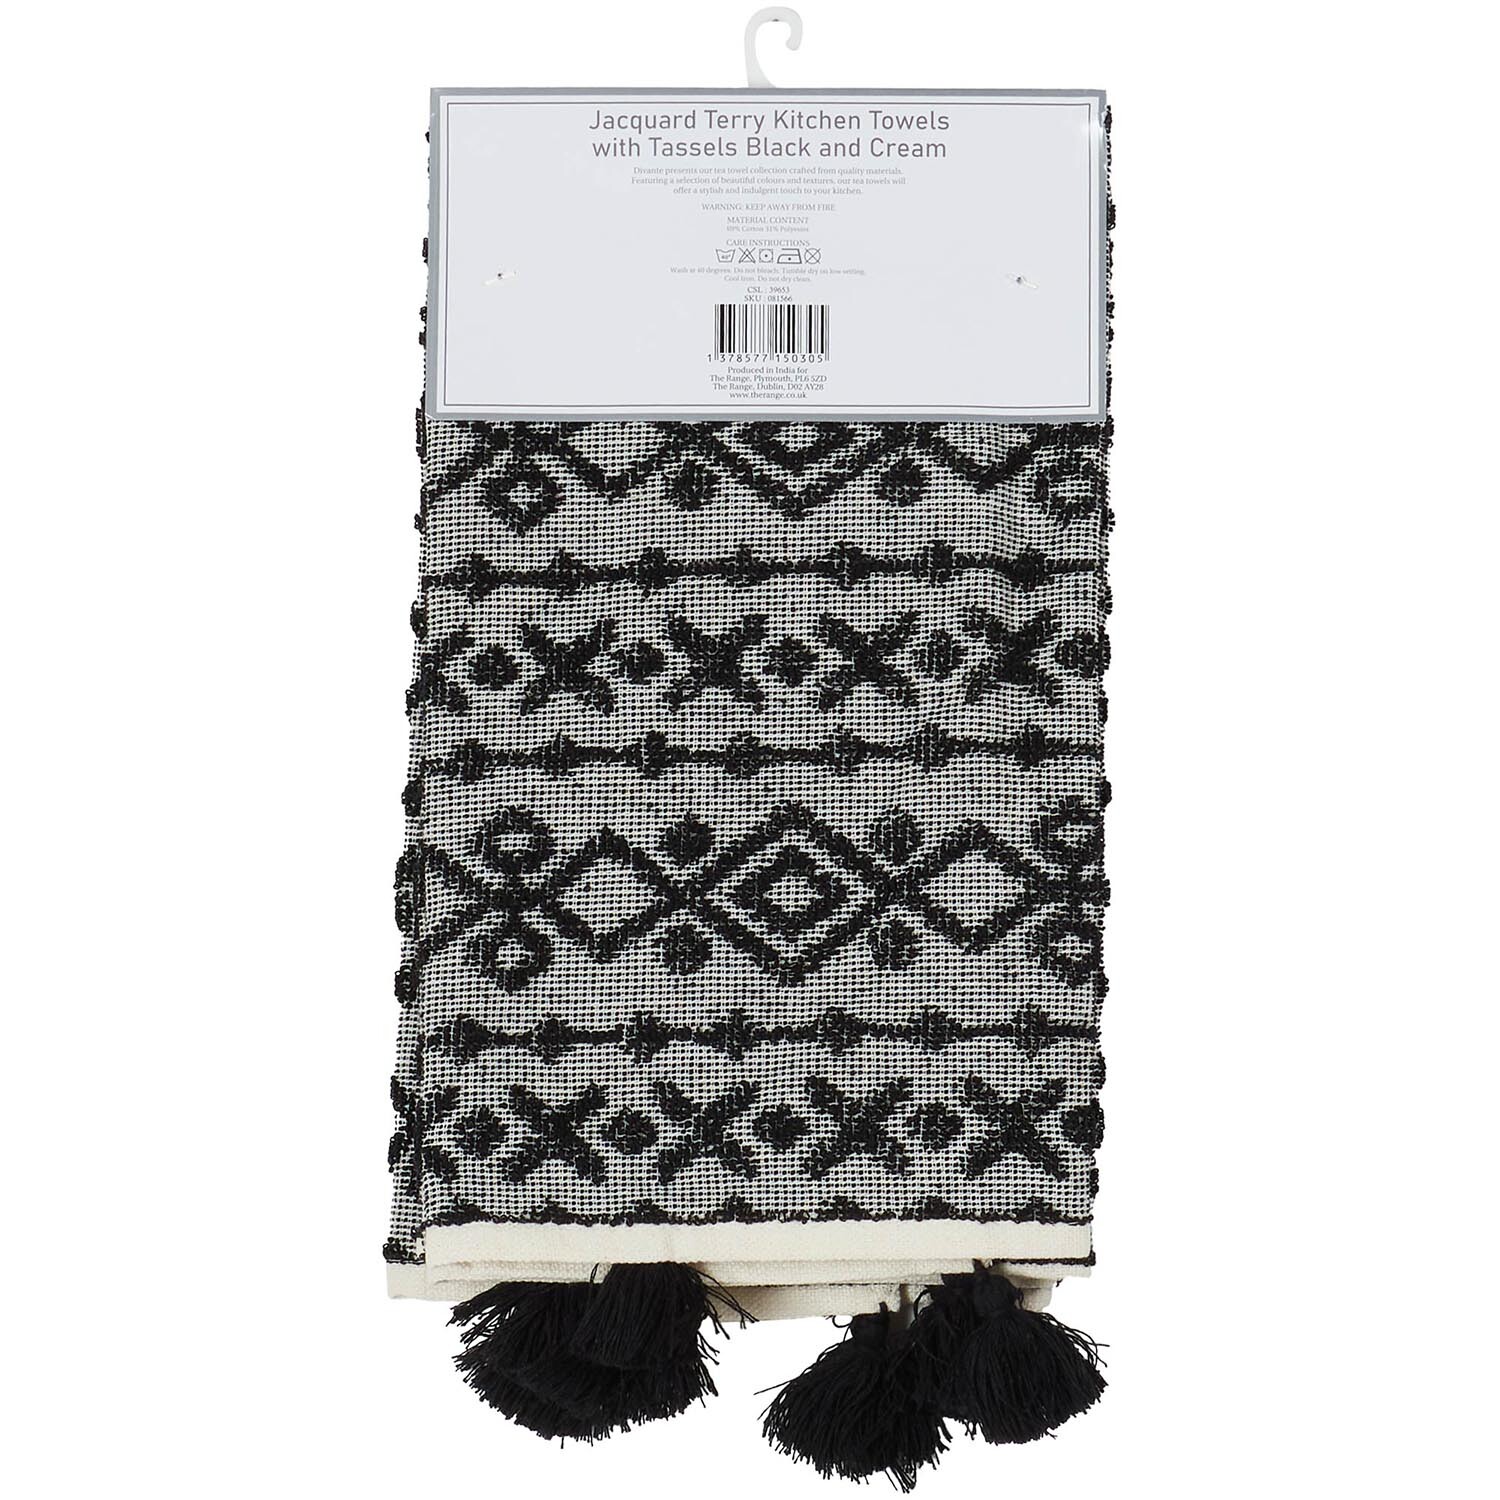 Pack of 2 Jacquard Terry Kitchen Towels with Tassels - Black Image 2